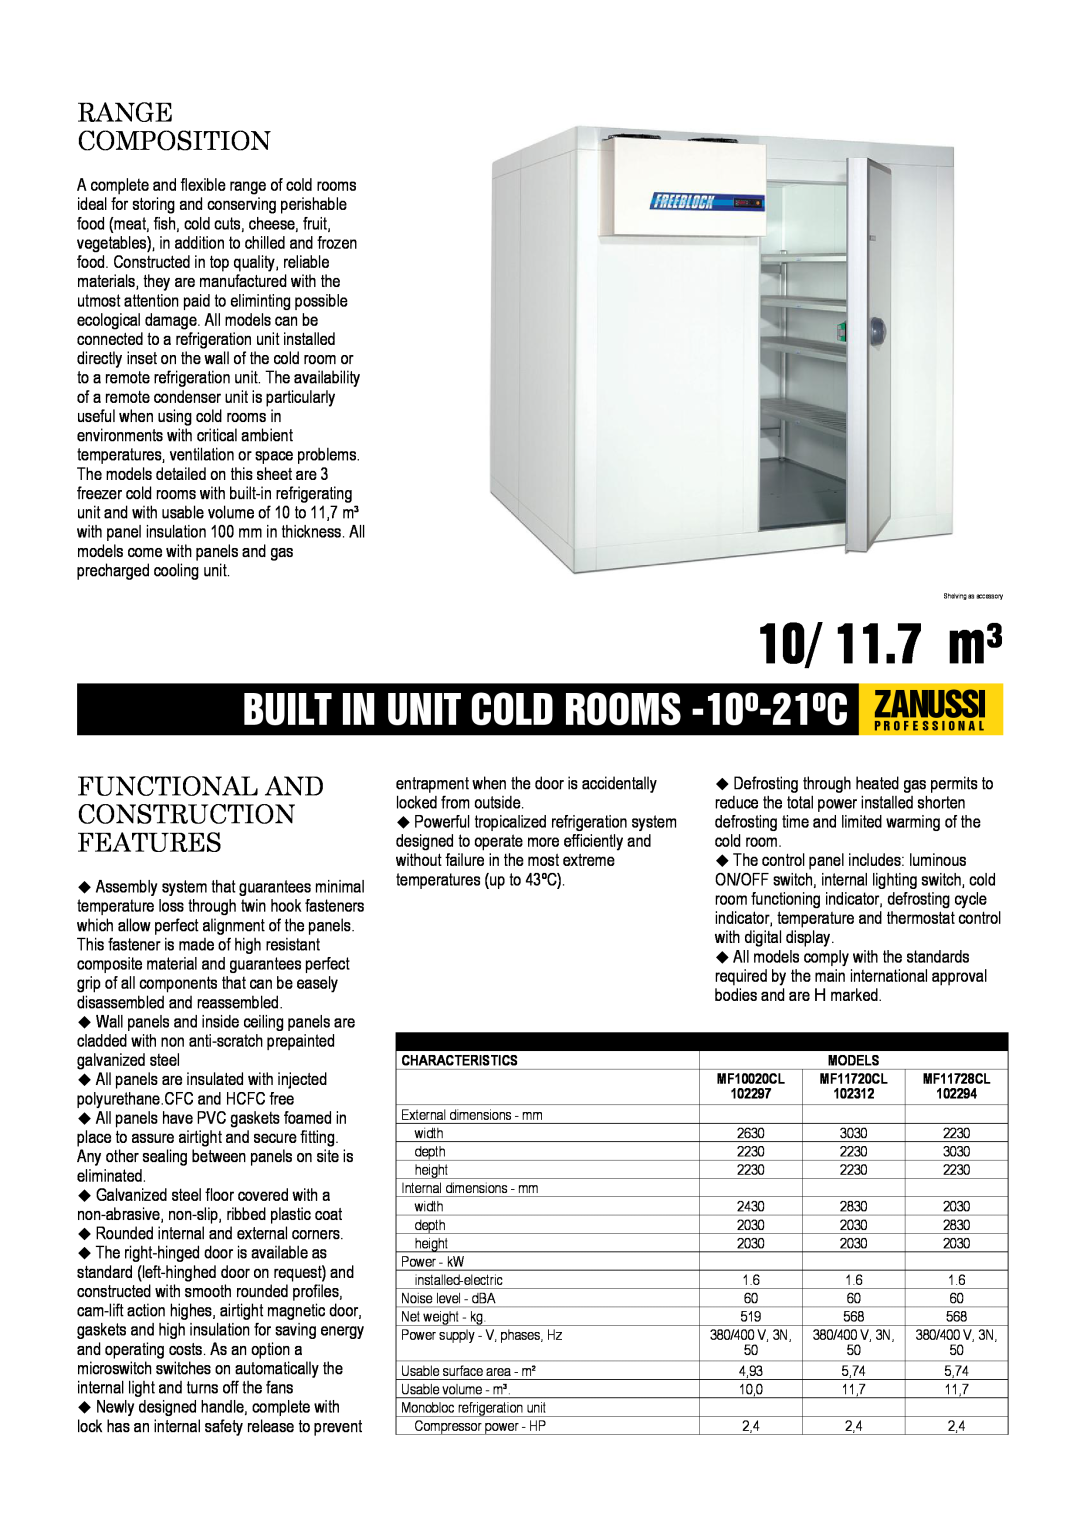 Zanussi MF10020CL, MF11720CL, MF11728CL dimensions 10/ 11.7 m³, Range Composition, Functional And Construction Features 